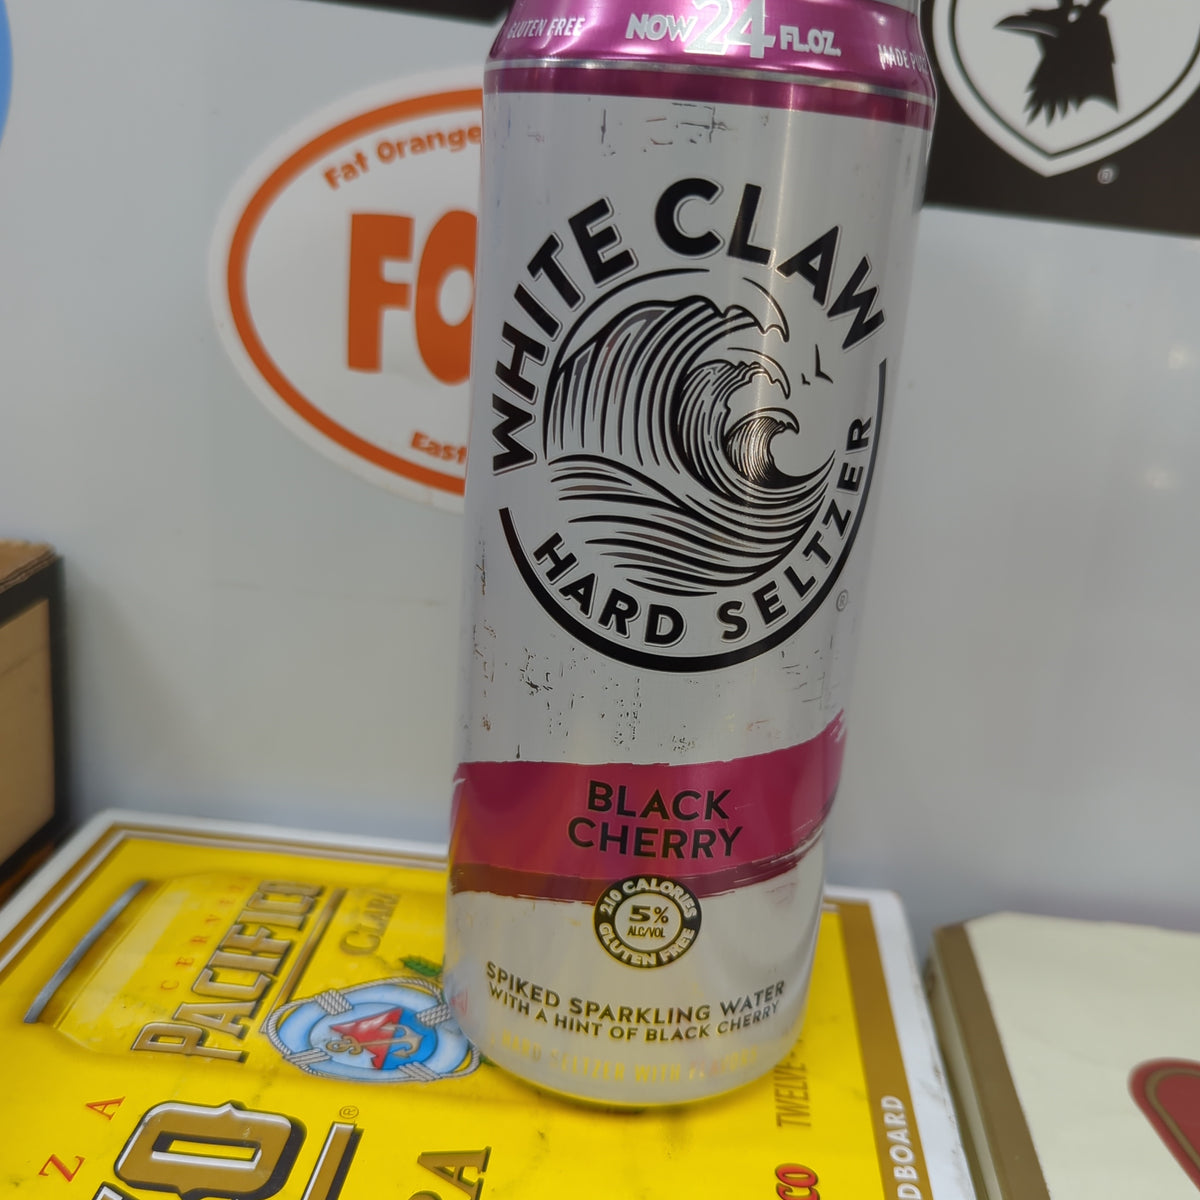 White Claw Hard Seltzer Can Black Cherry